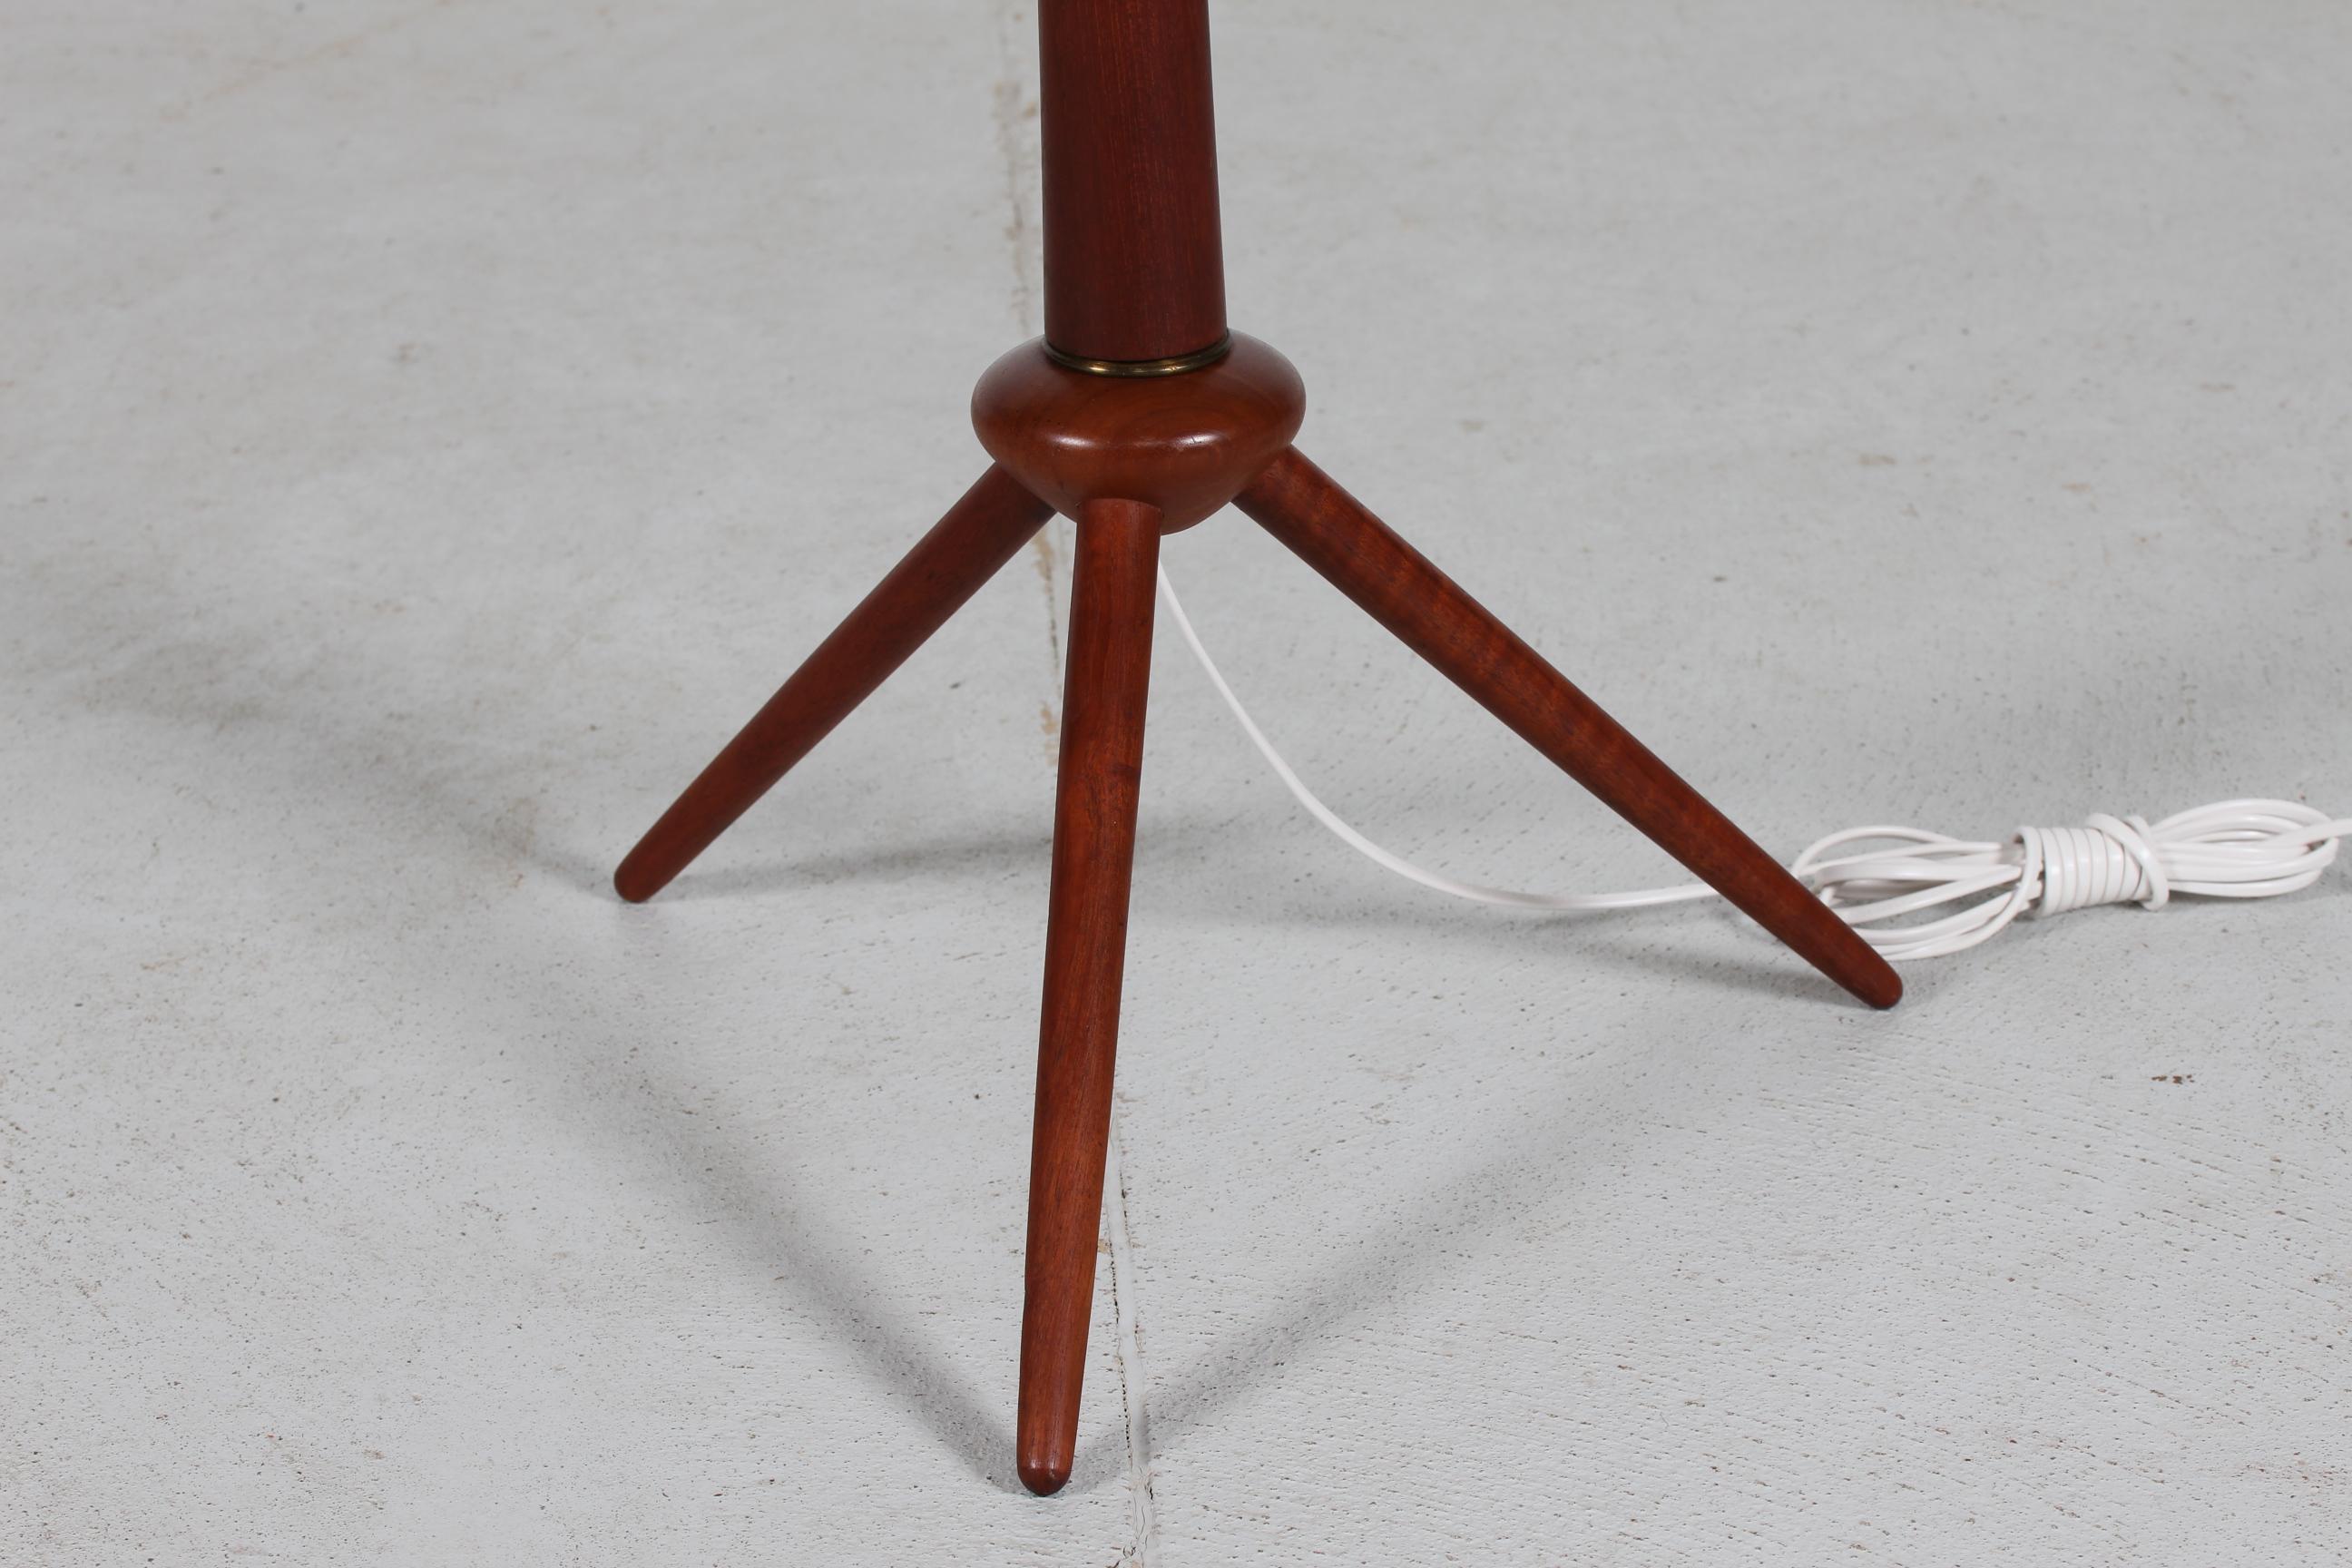 Danish lightning design, three legged floor lamp from the 1950´s made of hand-turned teak with old original Le Klint lamp shade designed by Robert Kasal

The legs of the lamp foot are slightly pointed.

Nice vintage condition with patina and